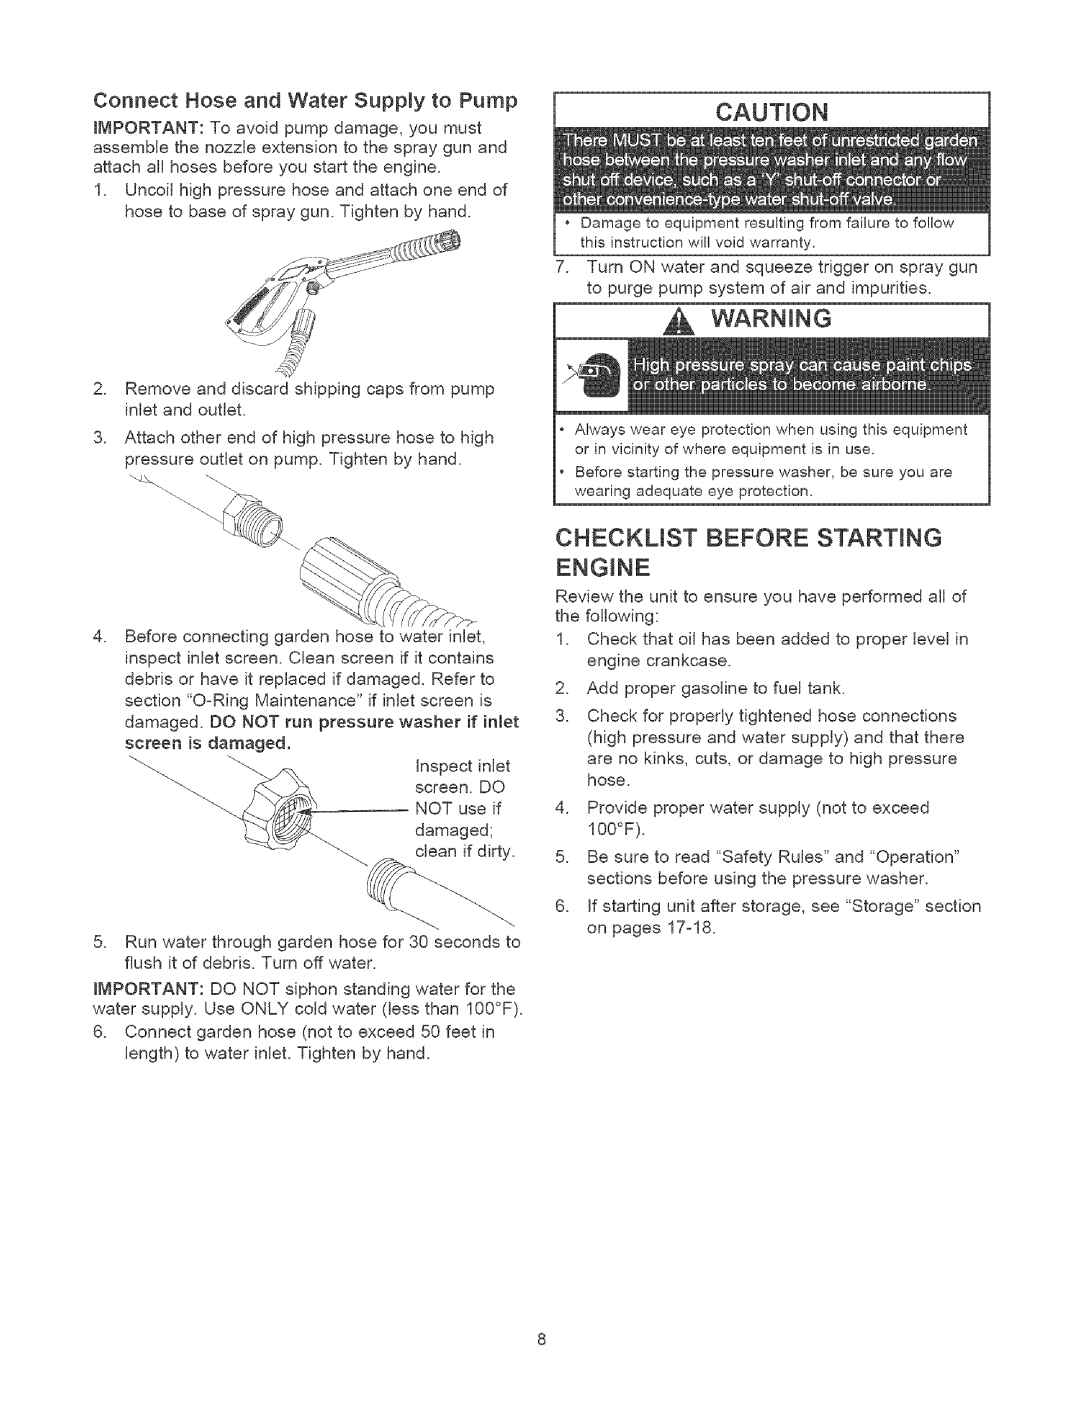 Craftsman 580.75231 owner manual Checkust Before Starting, Connect Hose and Water Supply to Pump 